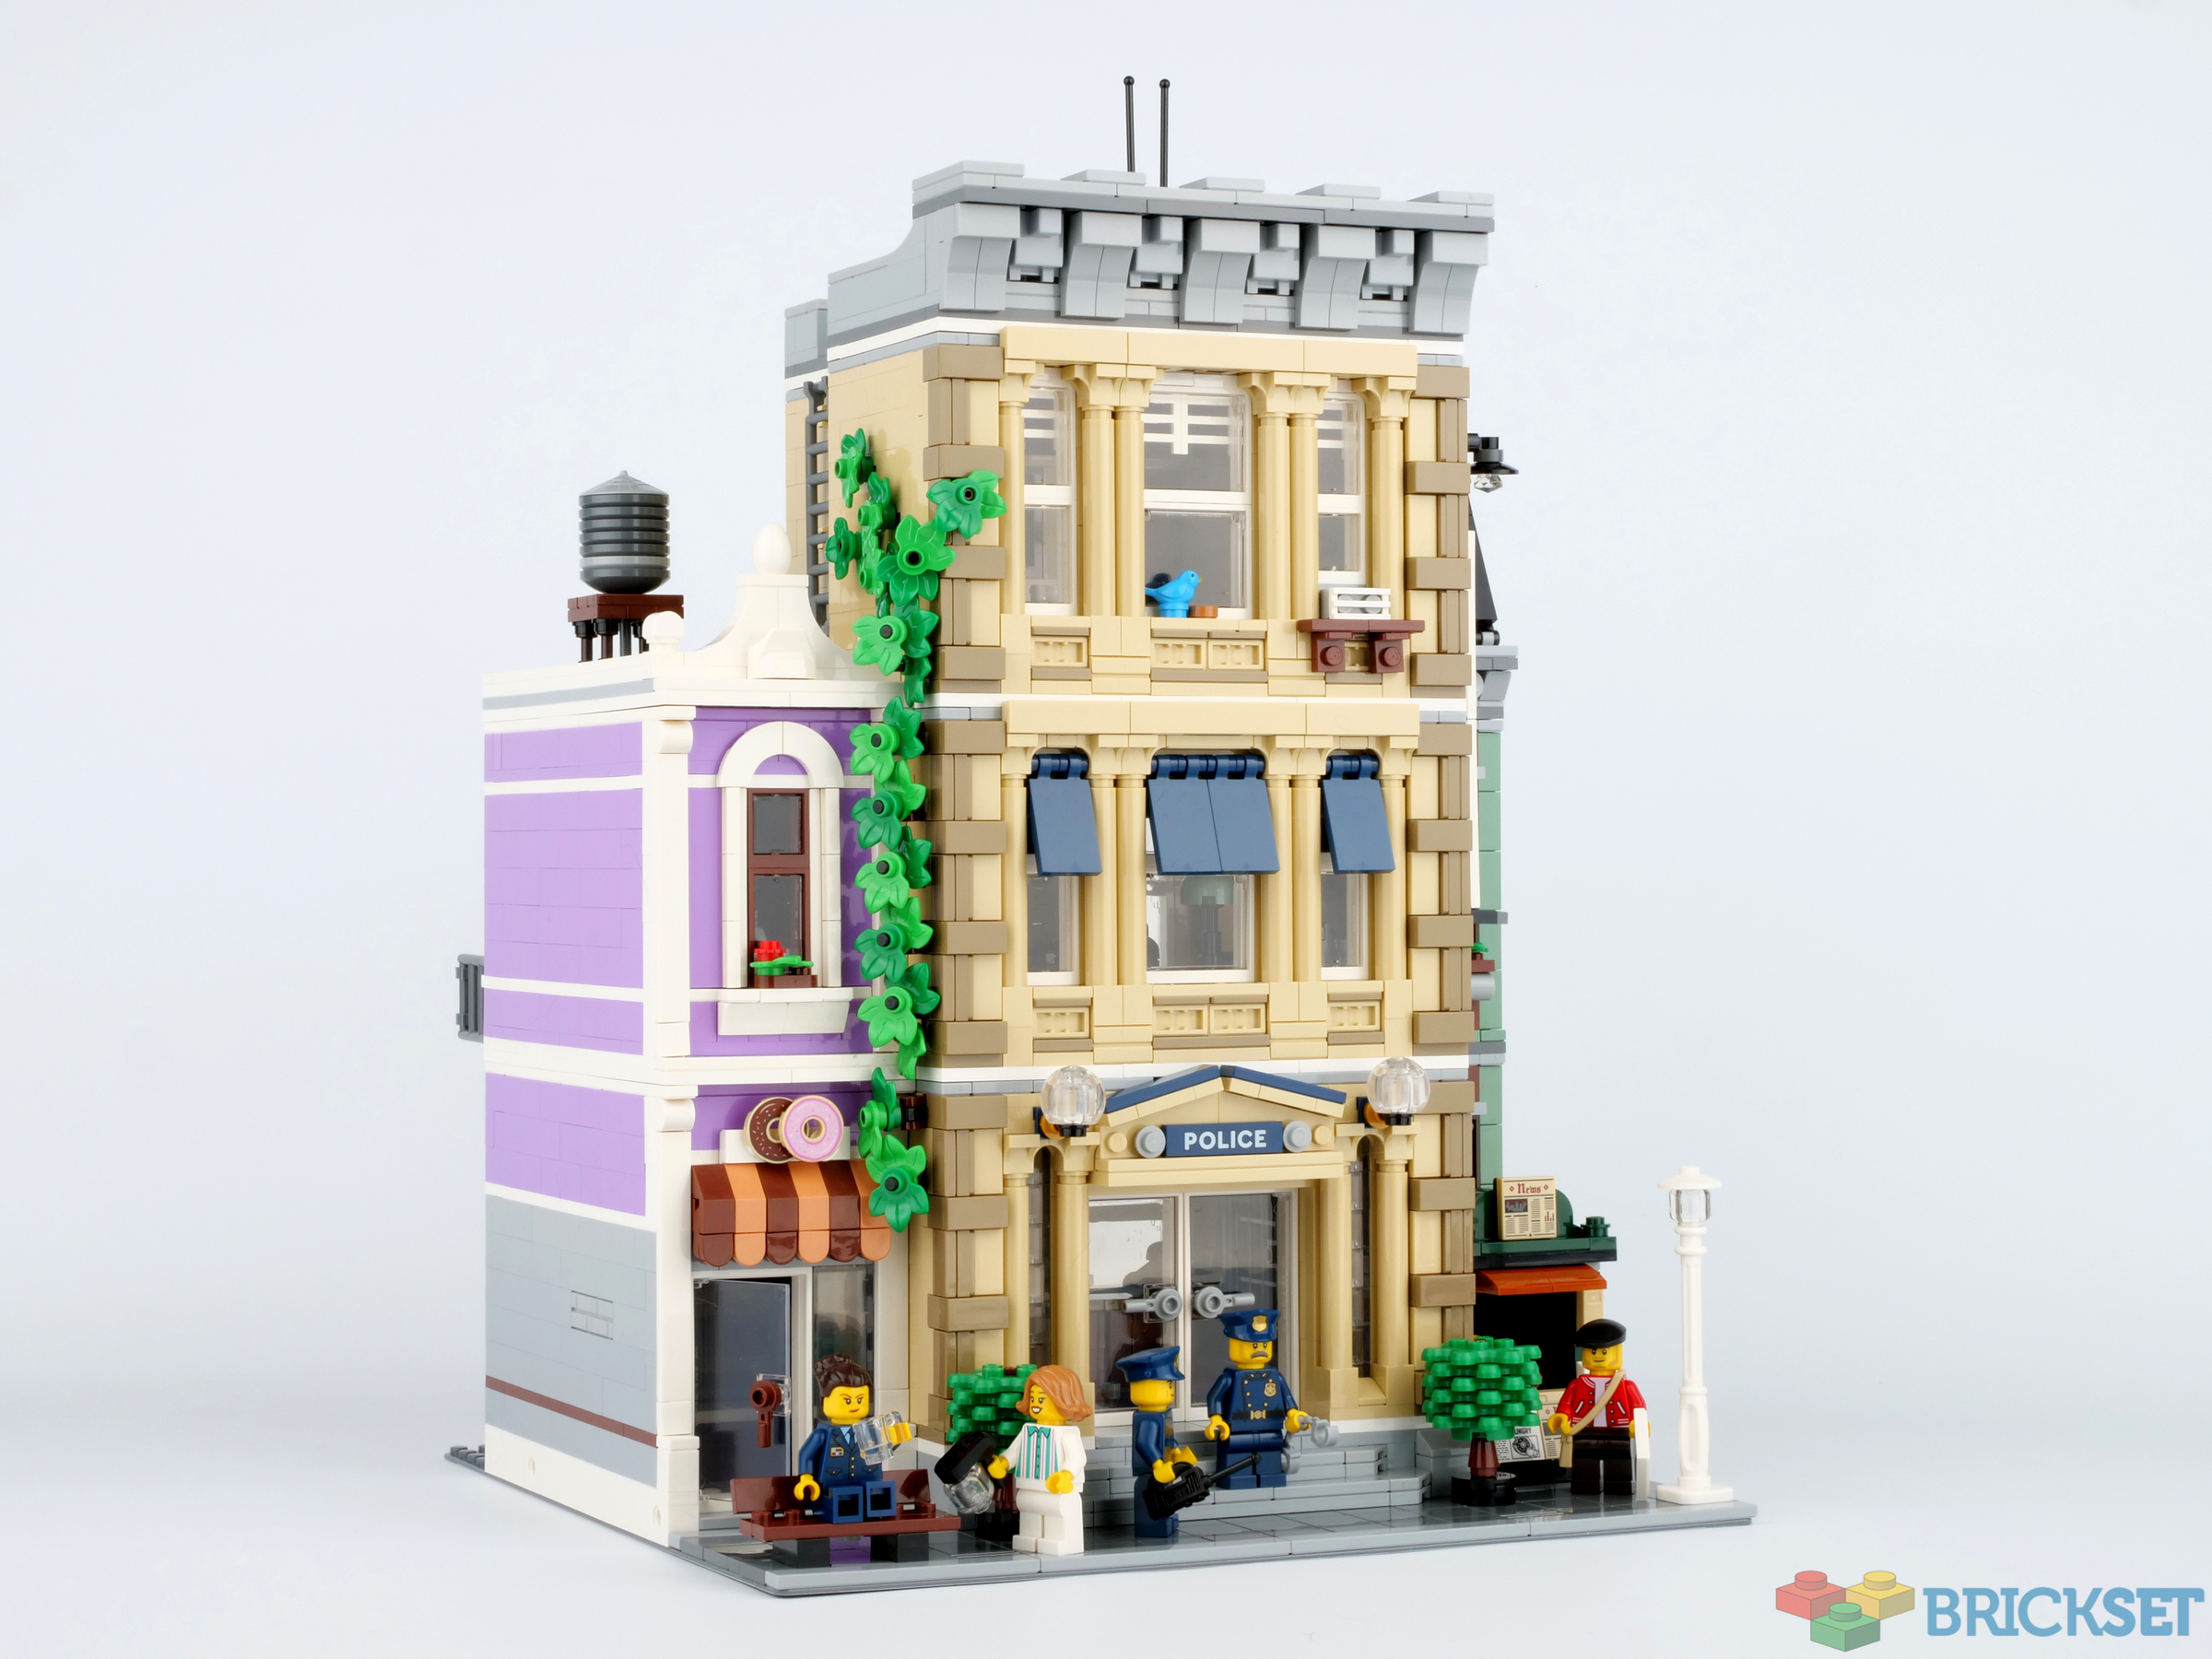 Review: 10278 Police Station Brickset: LEGO and